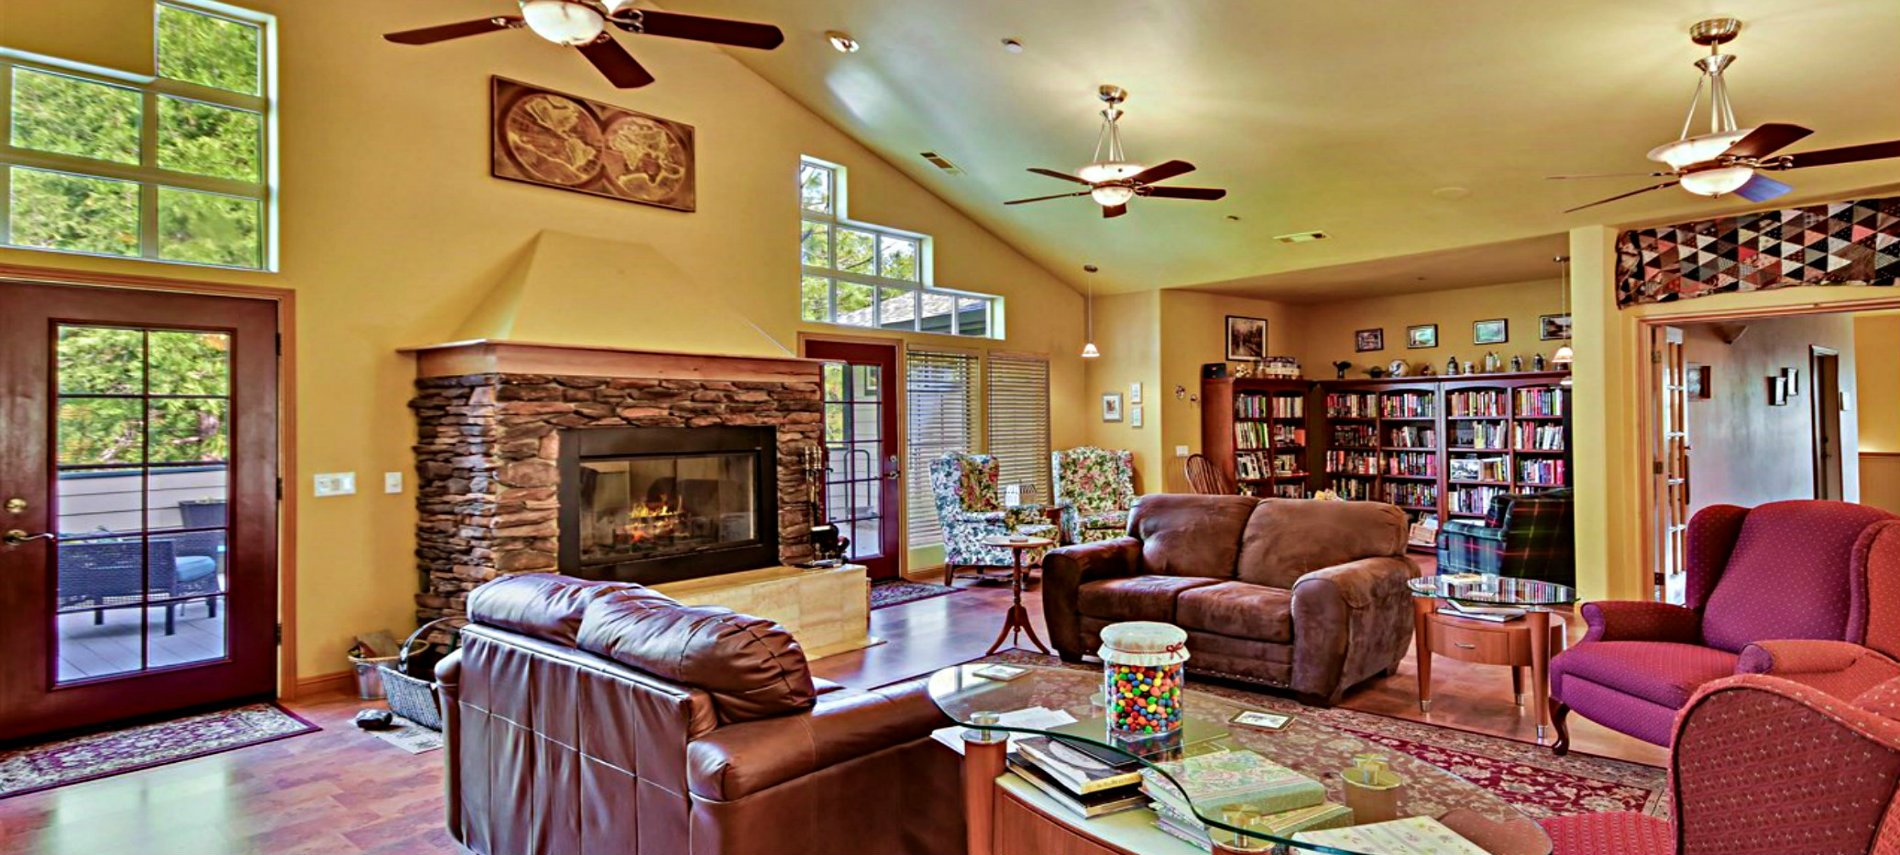 A large sitting room with brown sofas, red chairs, bookcases, a fireplace, ceiling fans and yellow walls. 